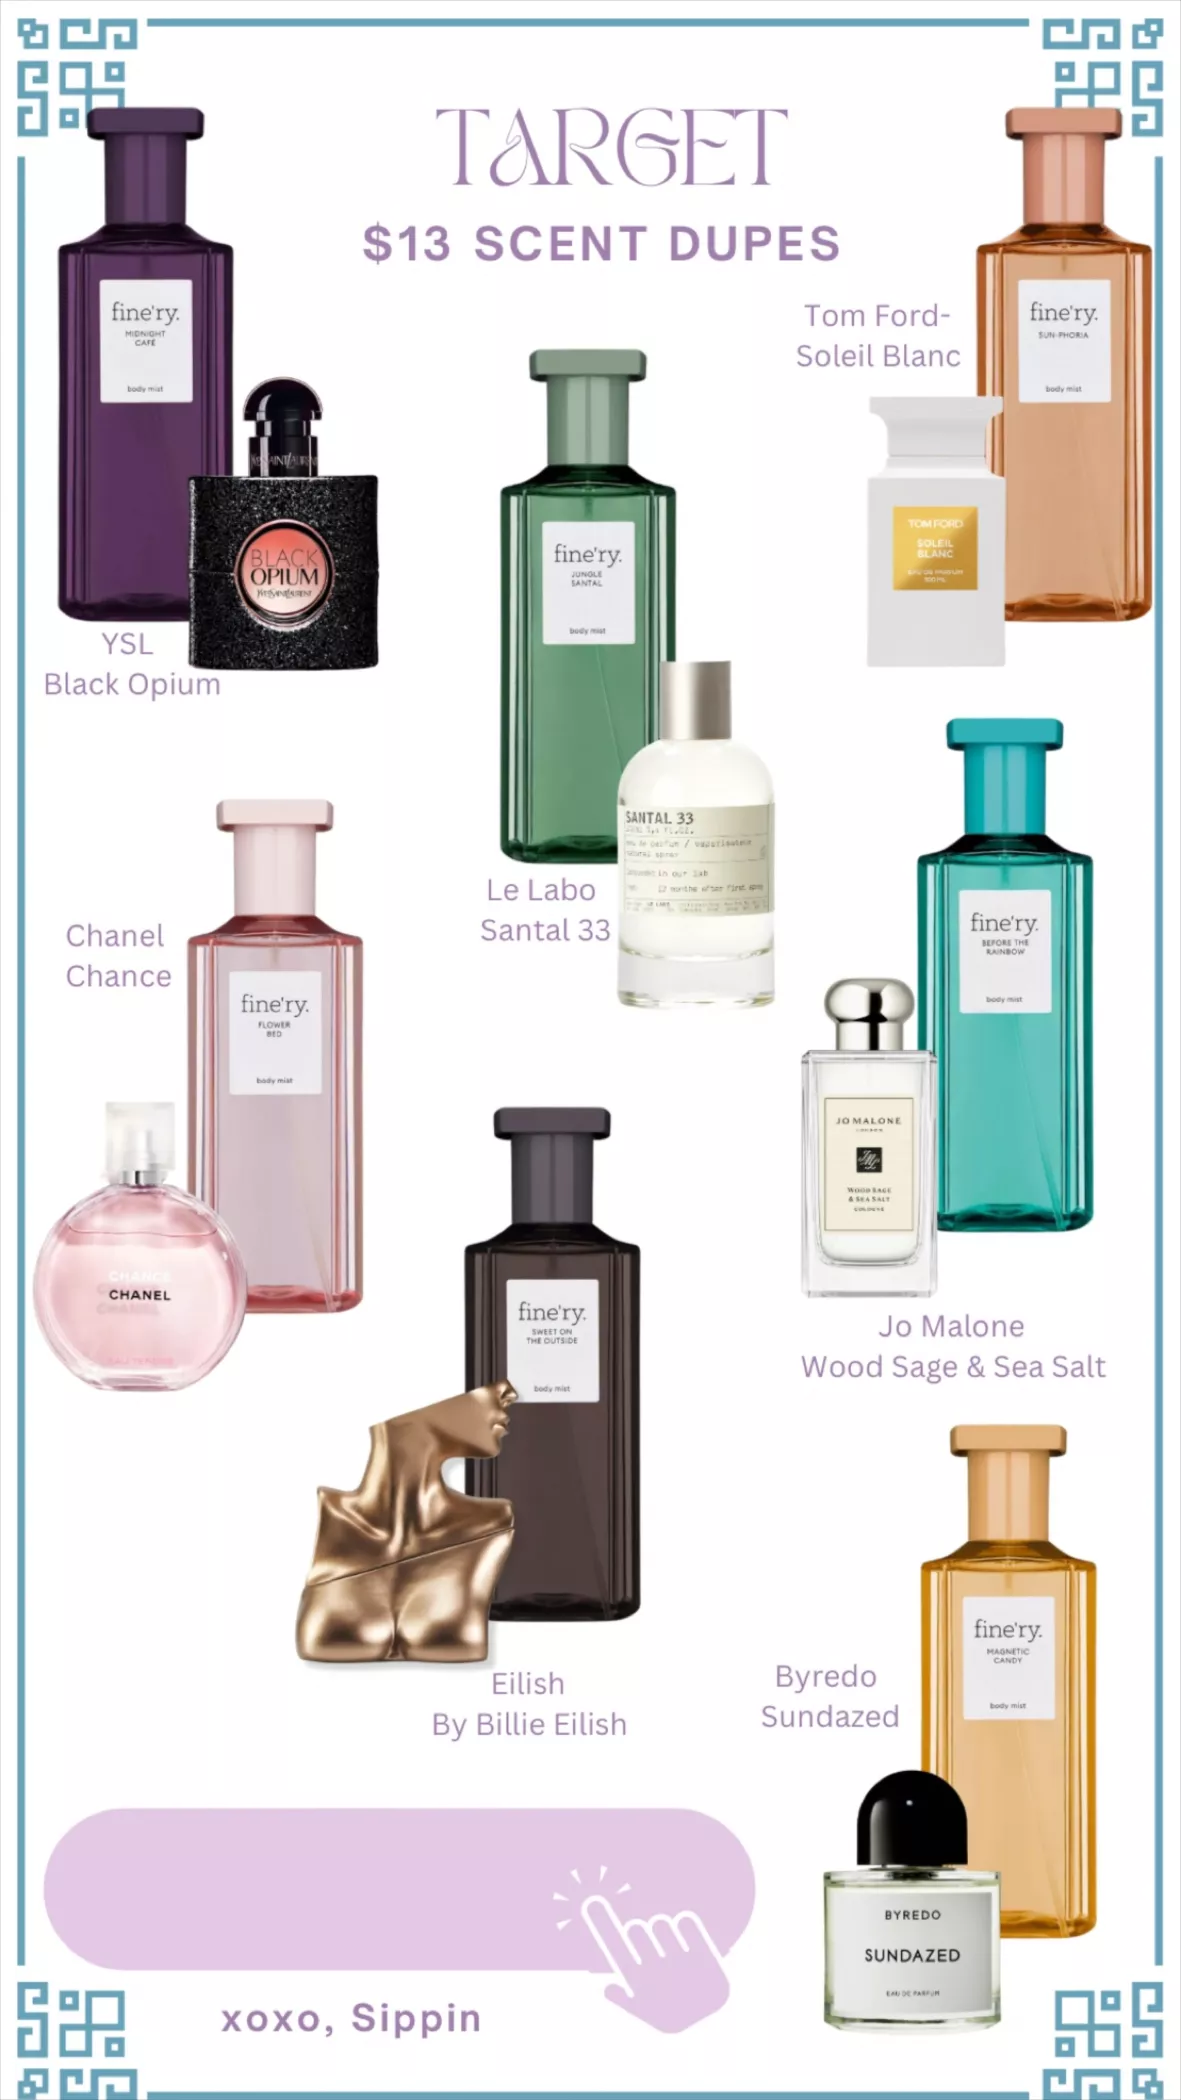 Shop Target's new Fine'ry perfume collection for designer dupes